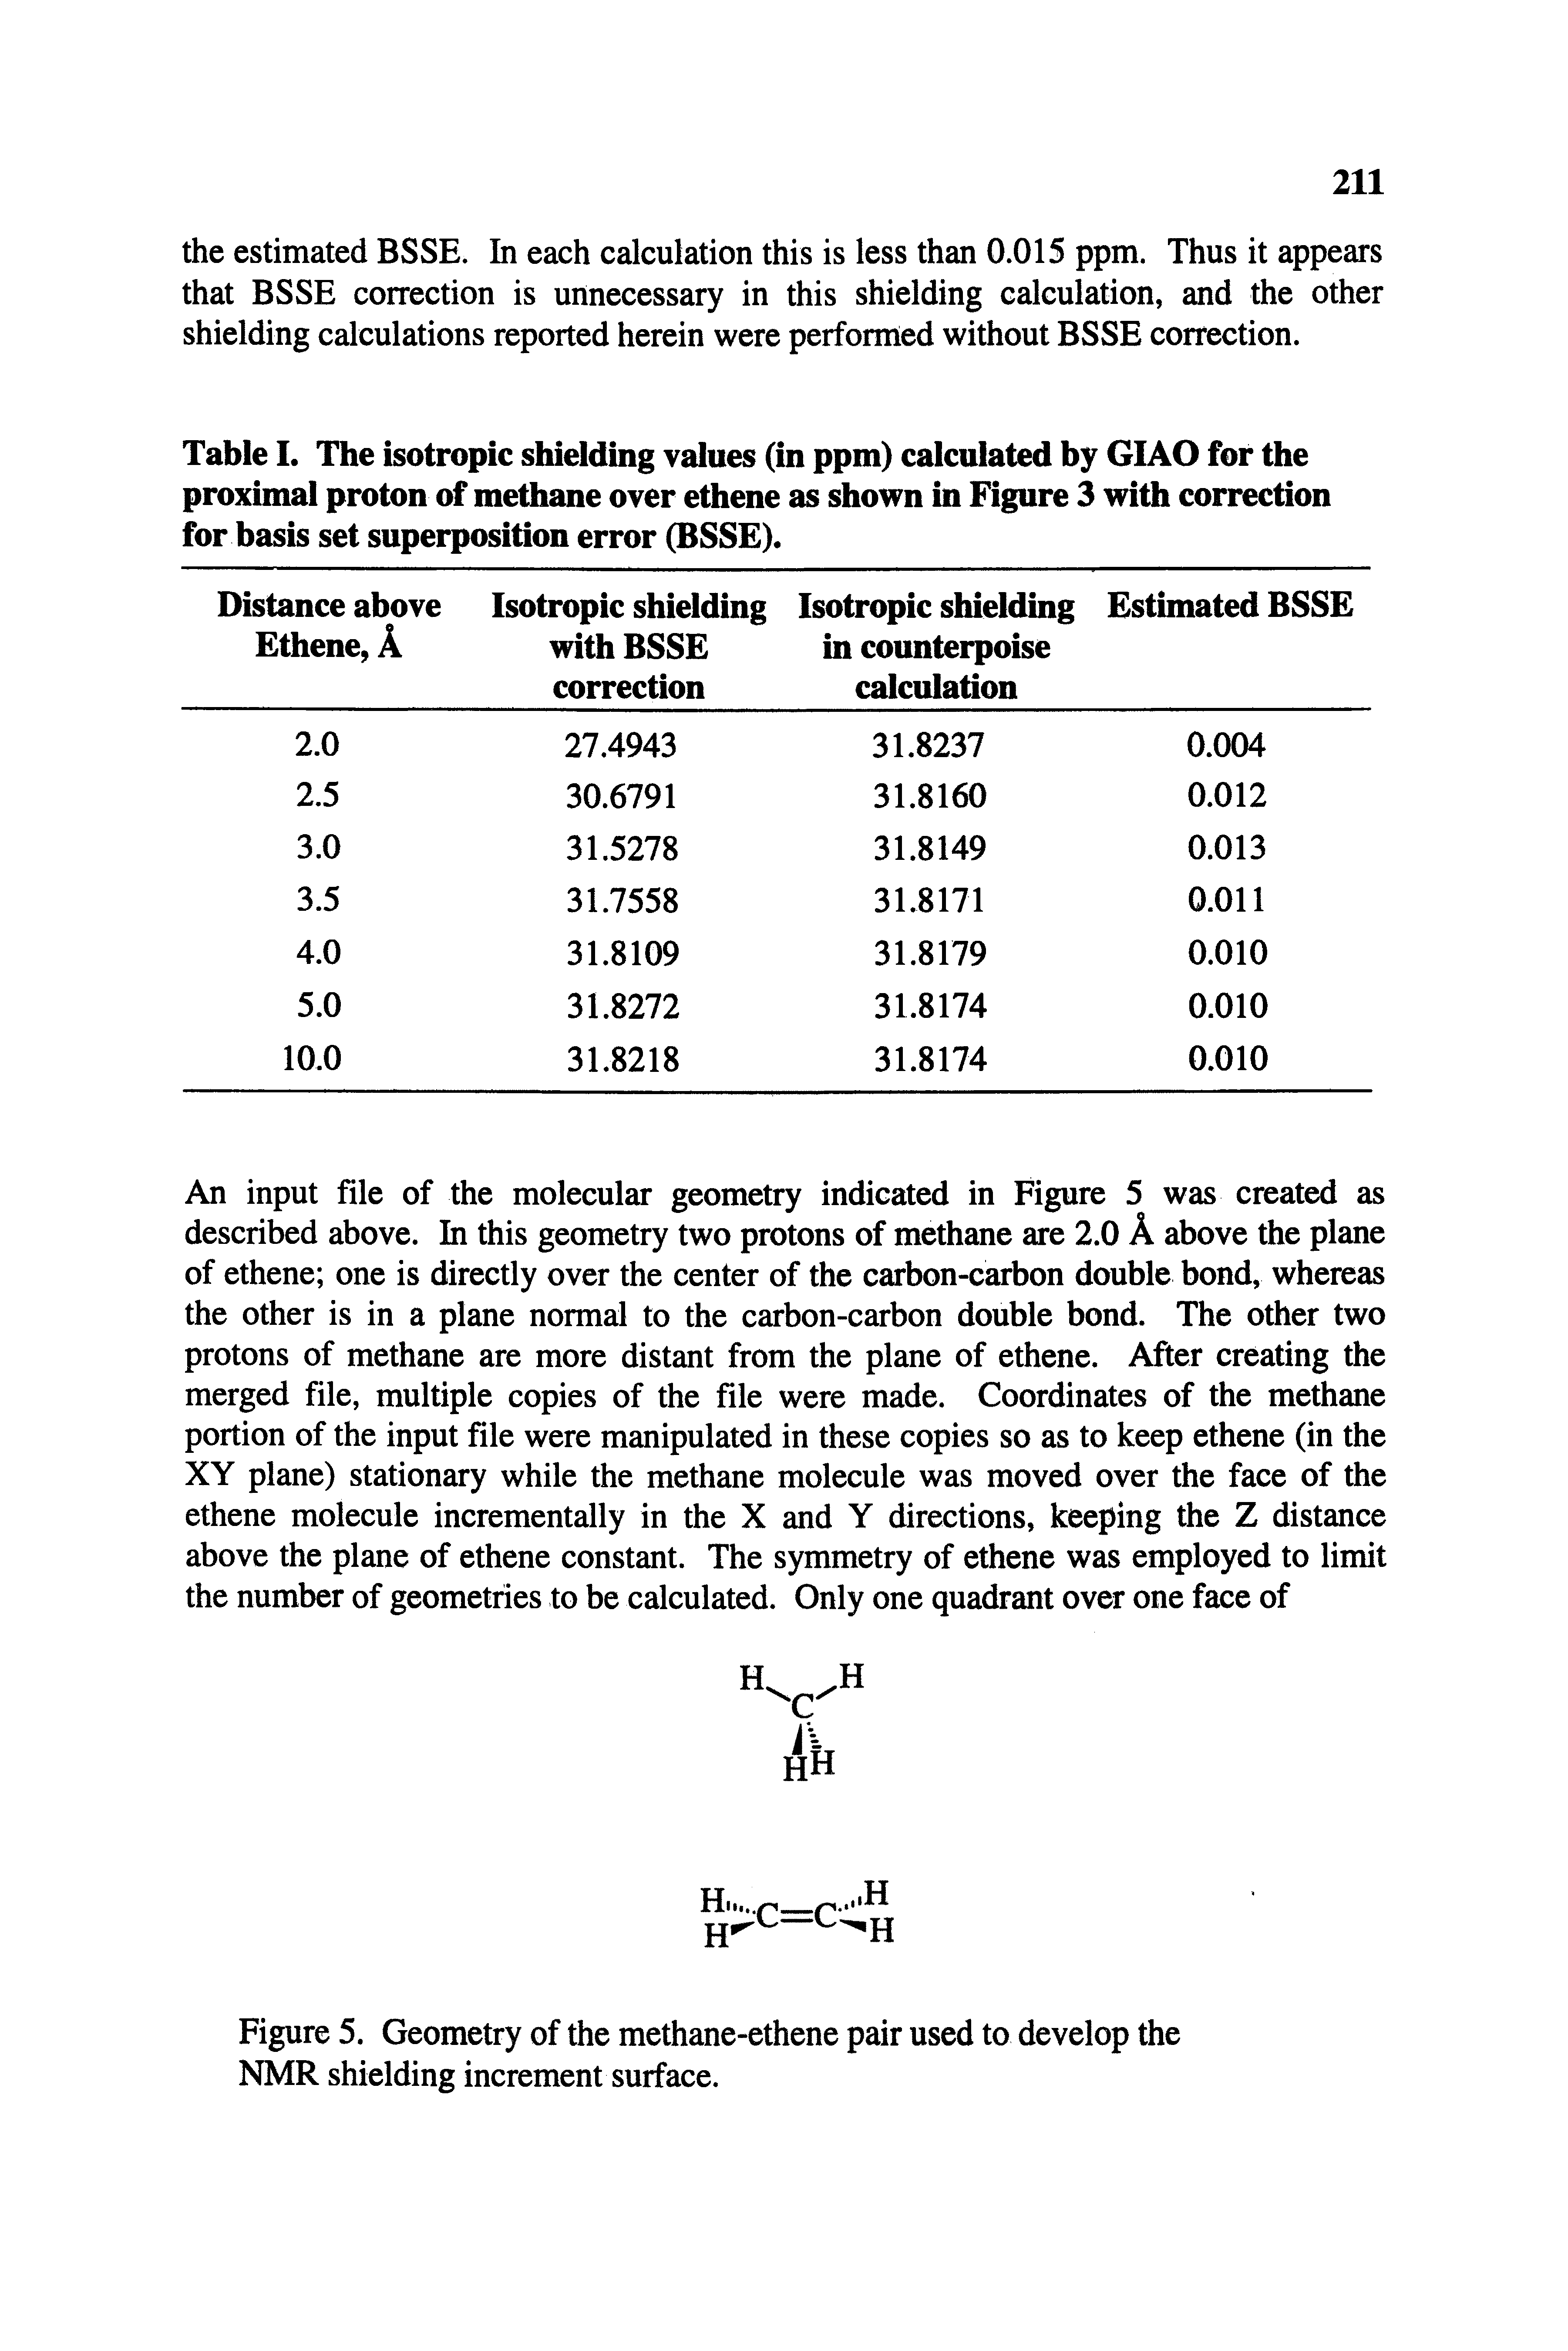 Table I. The isotropic shielding values (in ppm) calculated by GIAO for the proximal proton of methane over ethene as shown in Figure 3 with correction for basis set superposition error (BSSE).